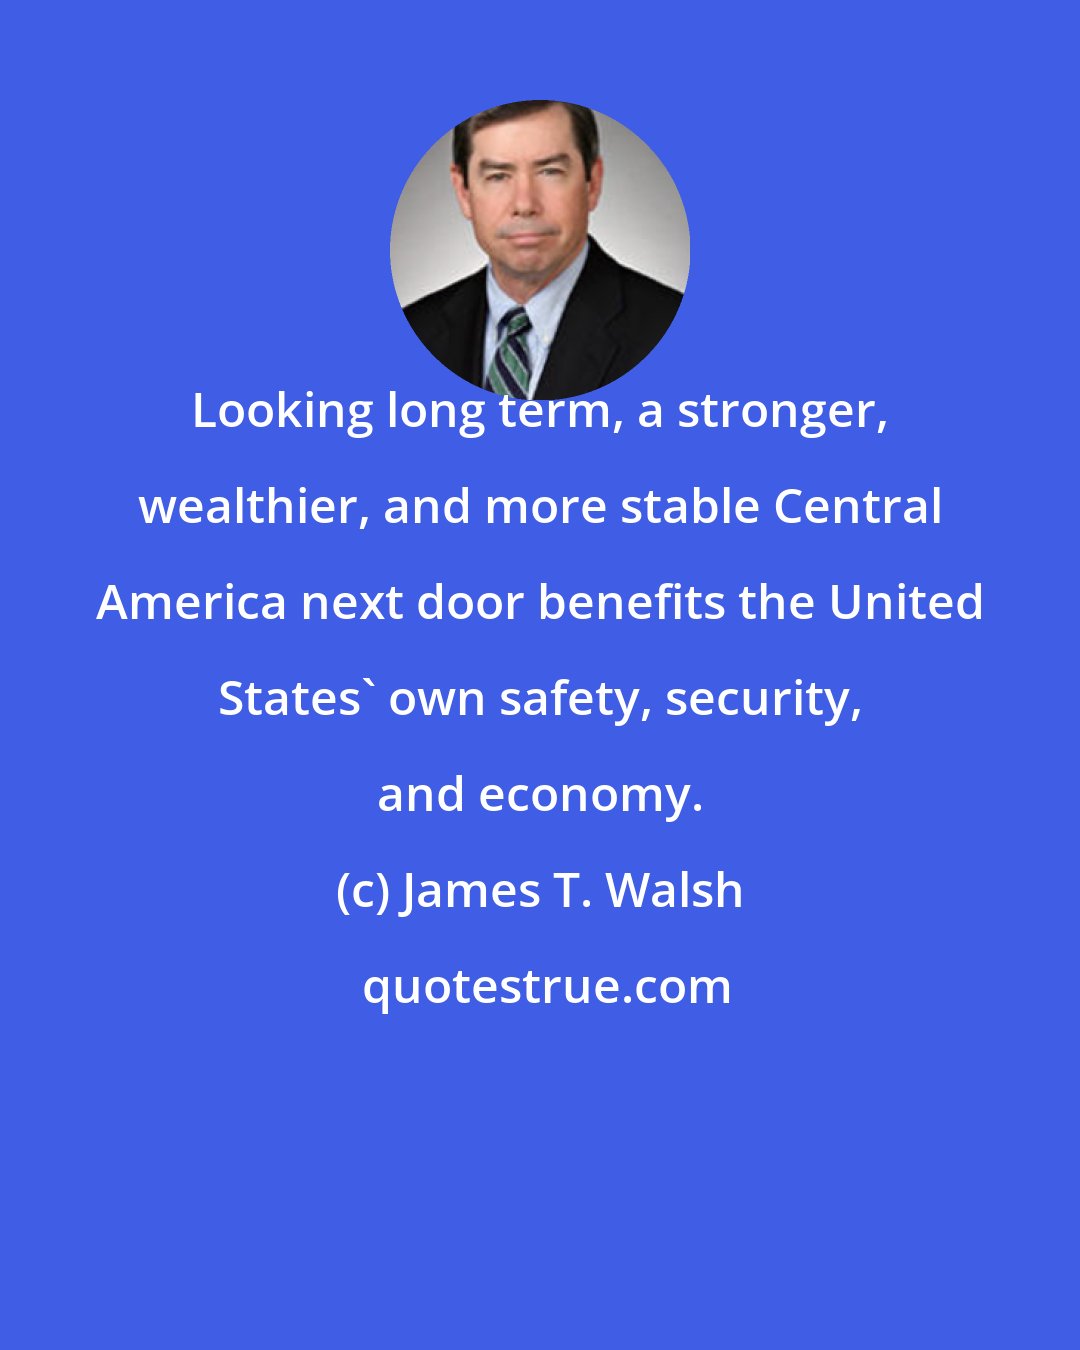 James T. Walsh: Looking long term, a stronger, wealthier, and more stable Central America next door benefits the United States' own safety, security, and economy.